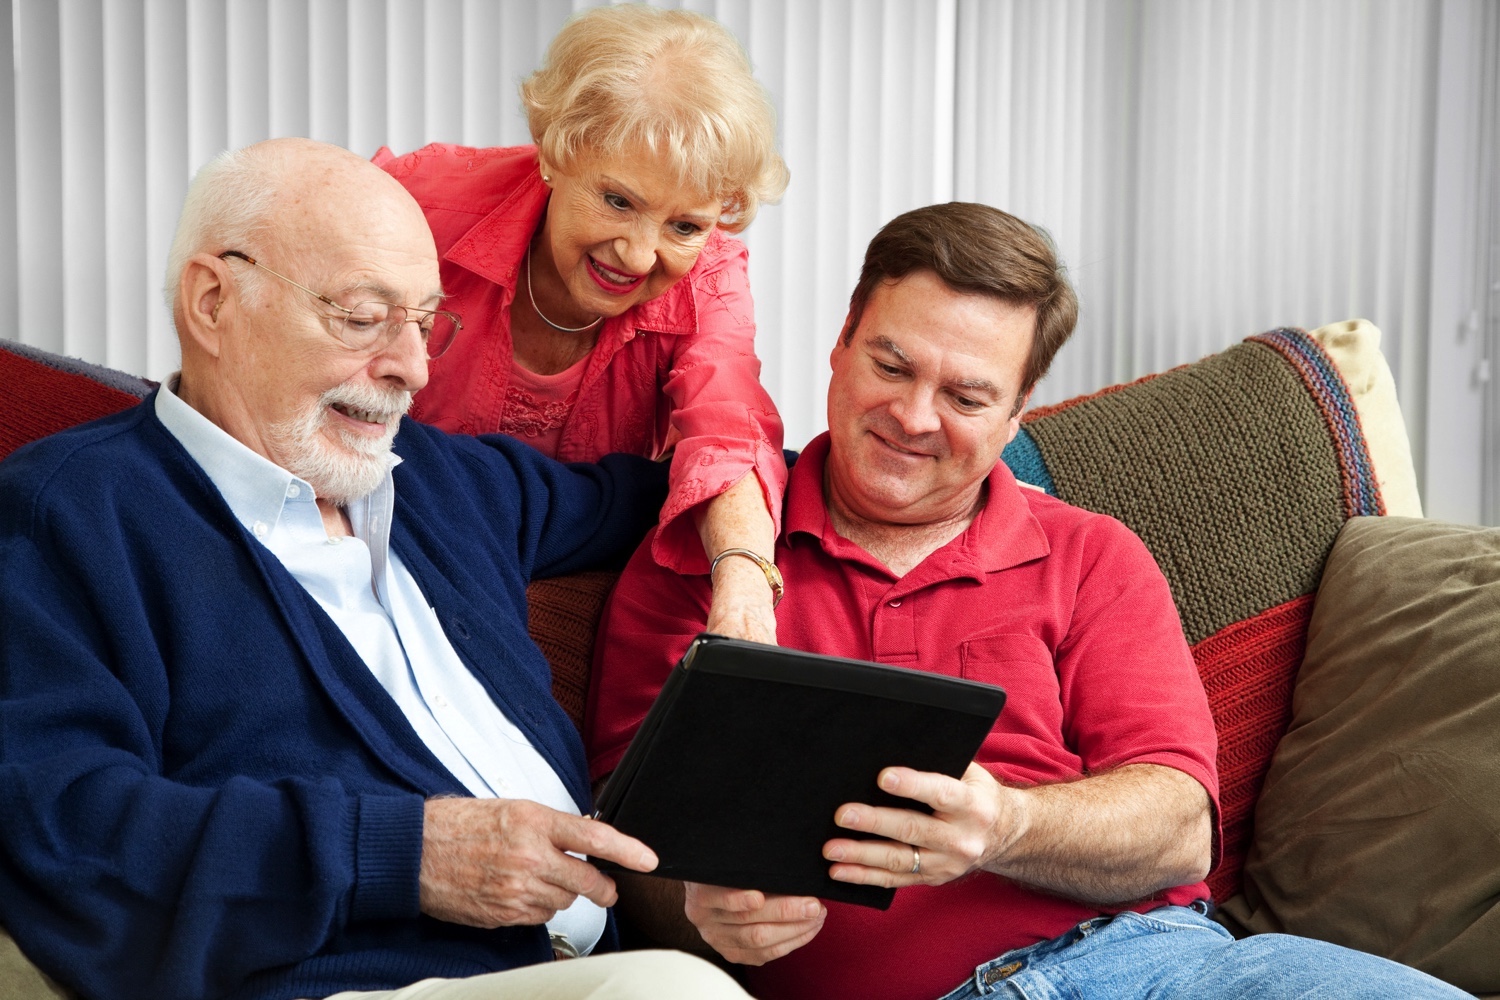 Seniors and caregiver Using Tablet PC-177537514